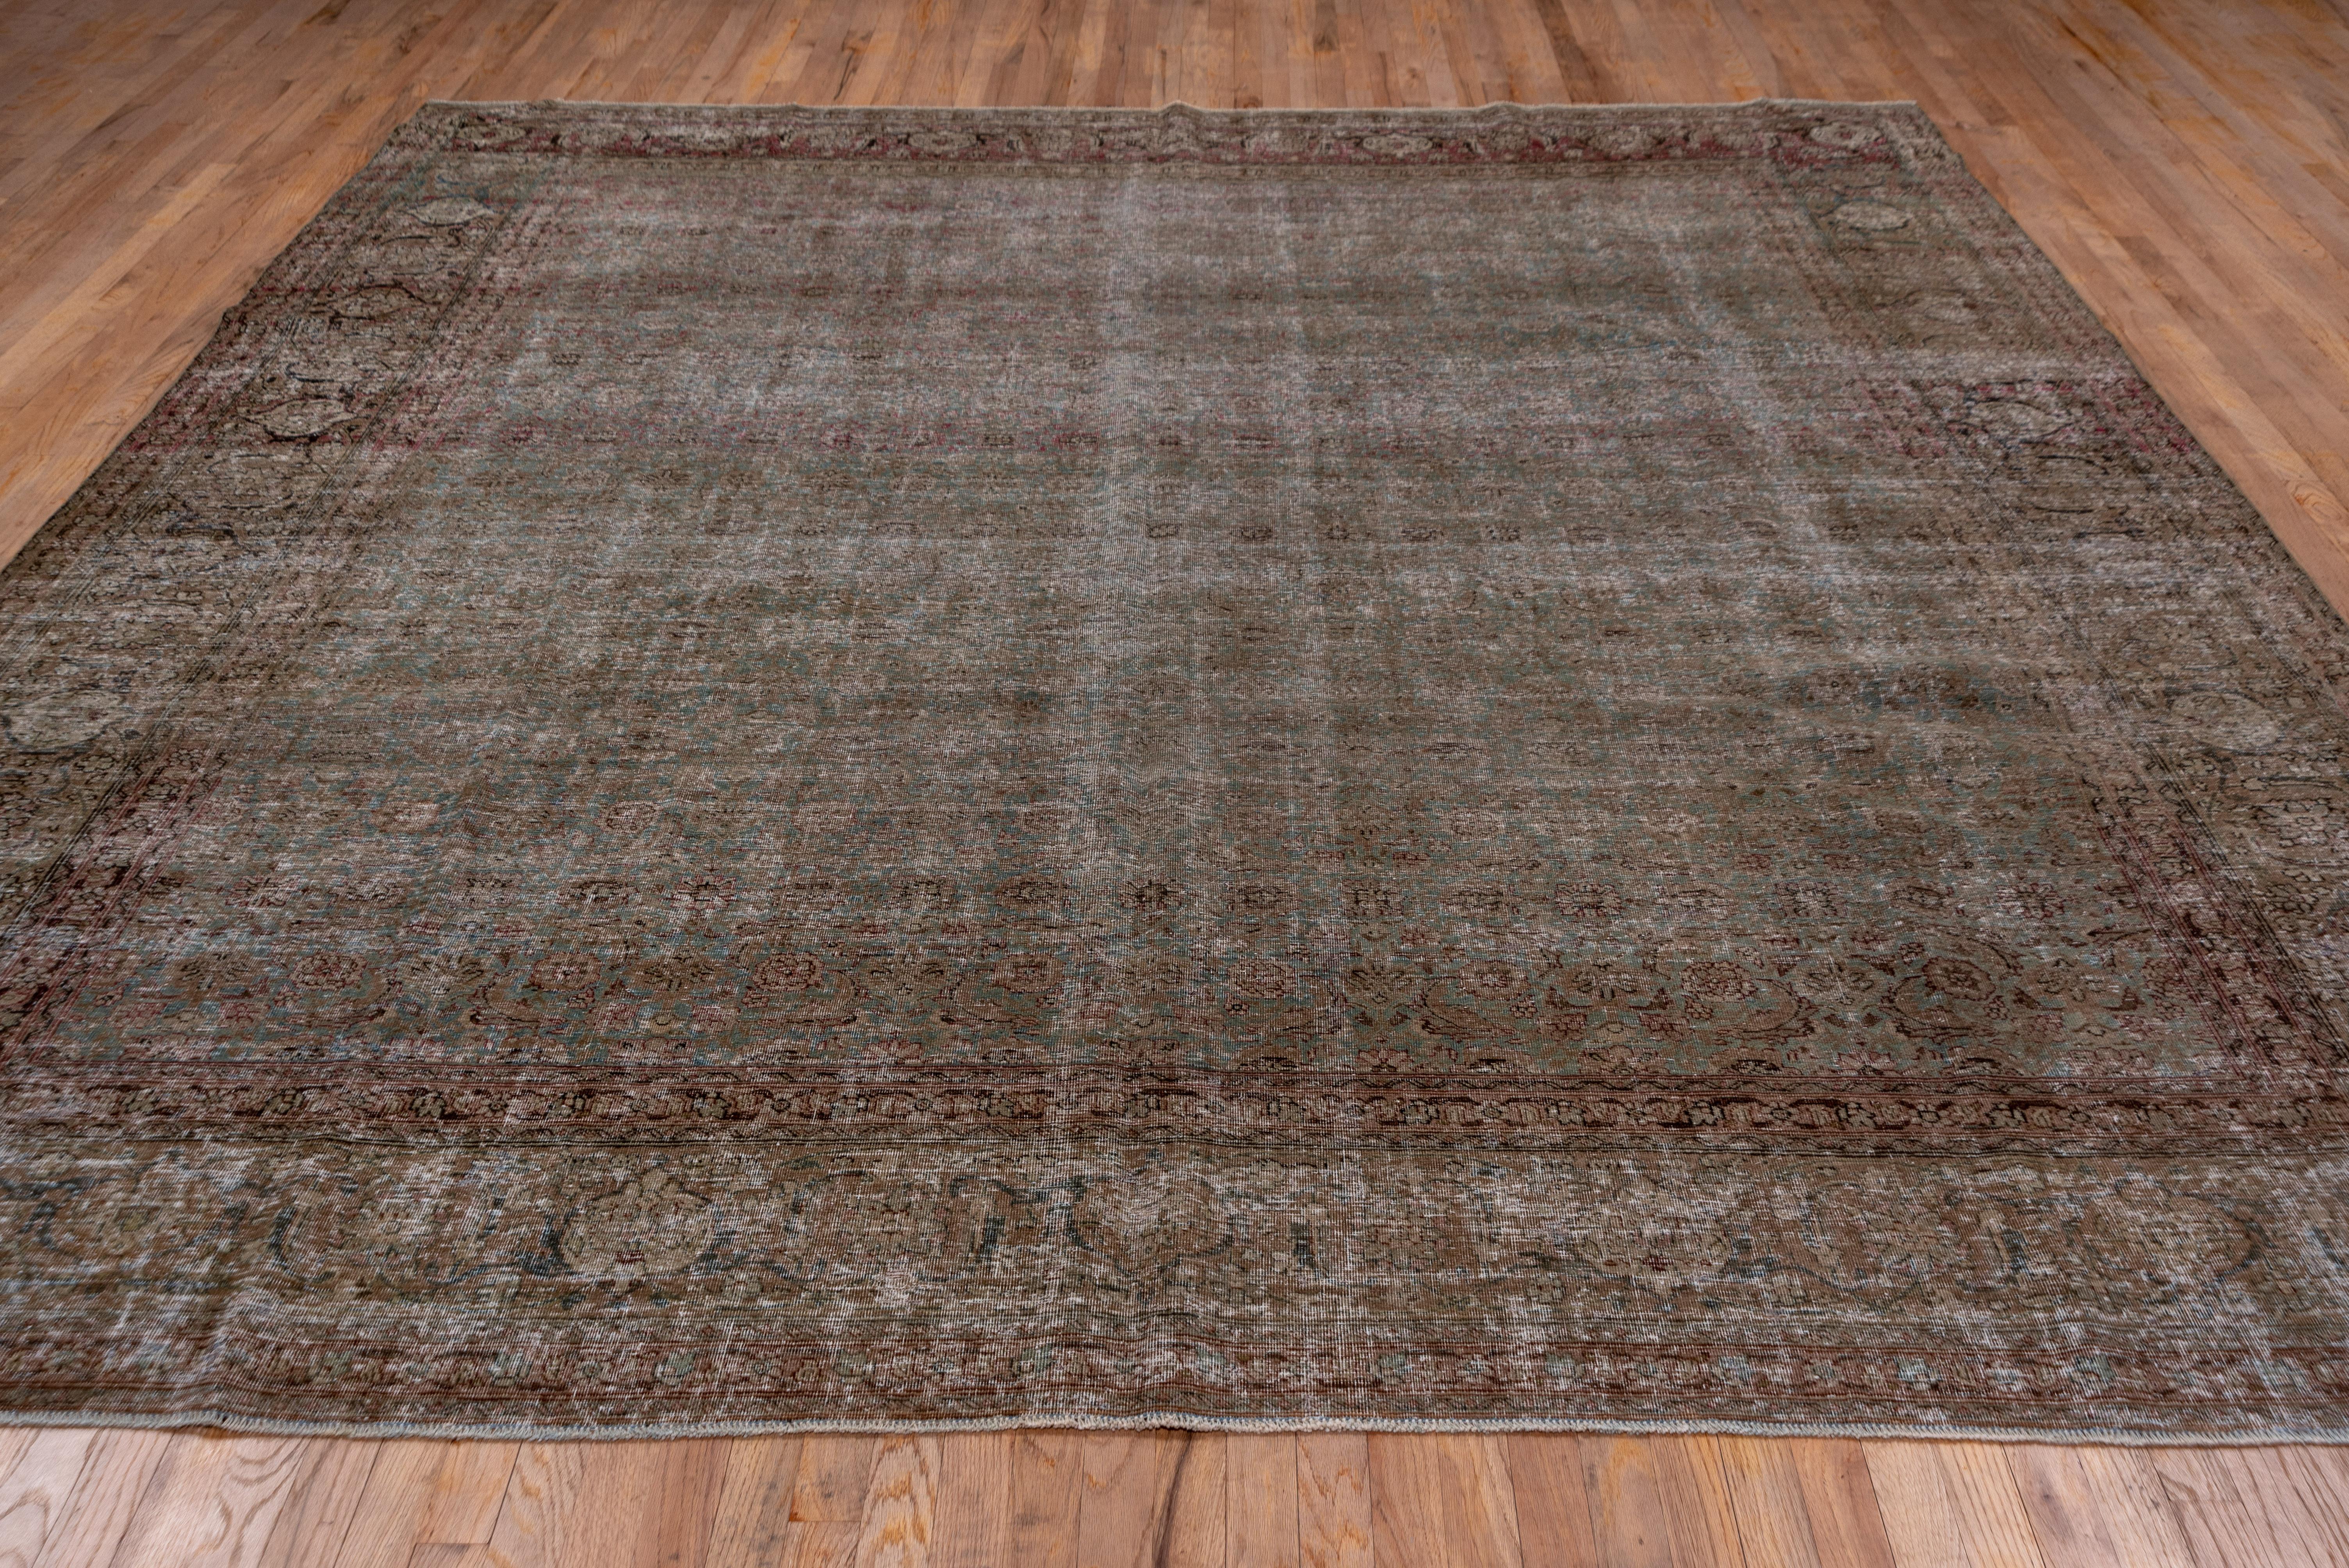 Hand-Knotted Shabby Chic & Colorful Antique Persian Tabriz Rug, Blue and Green All-Over Field